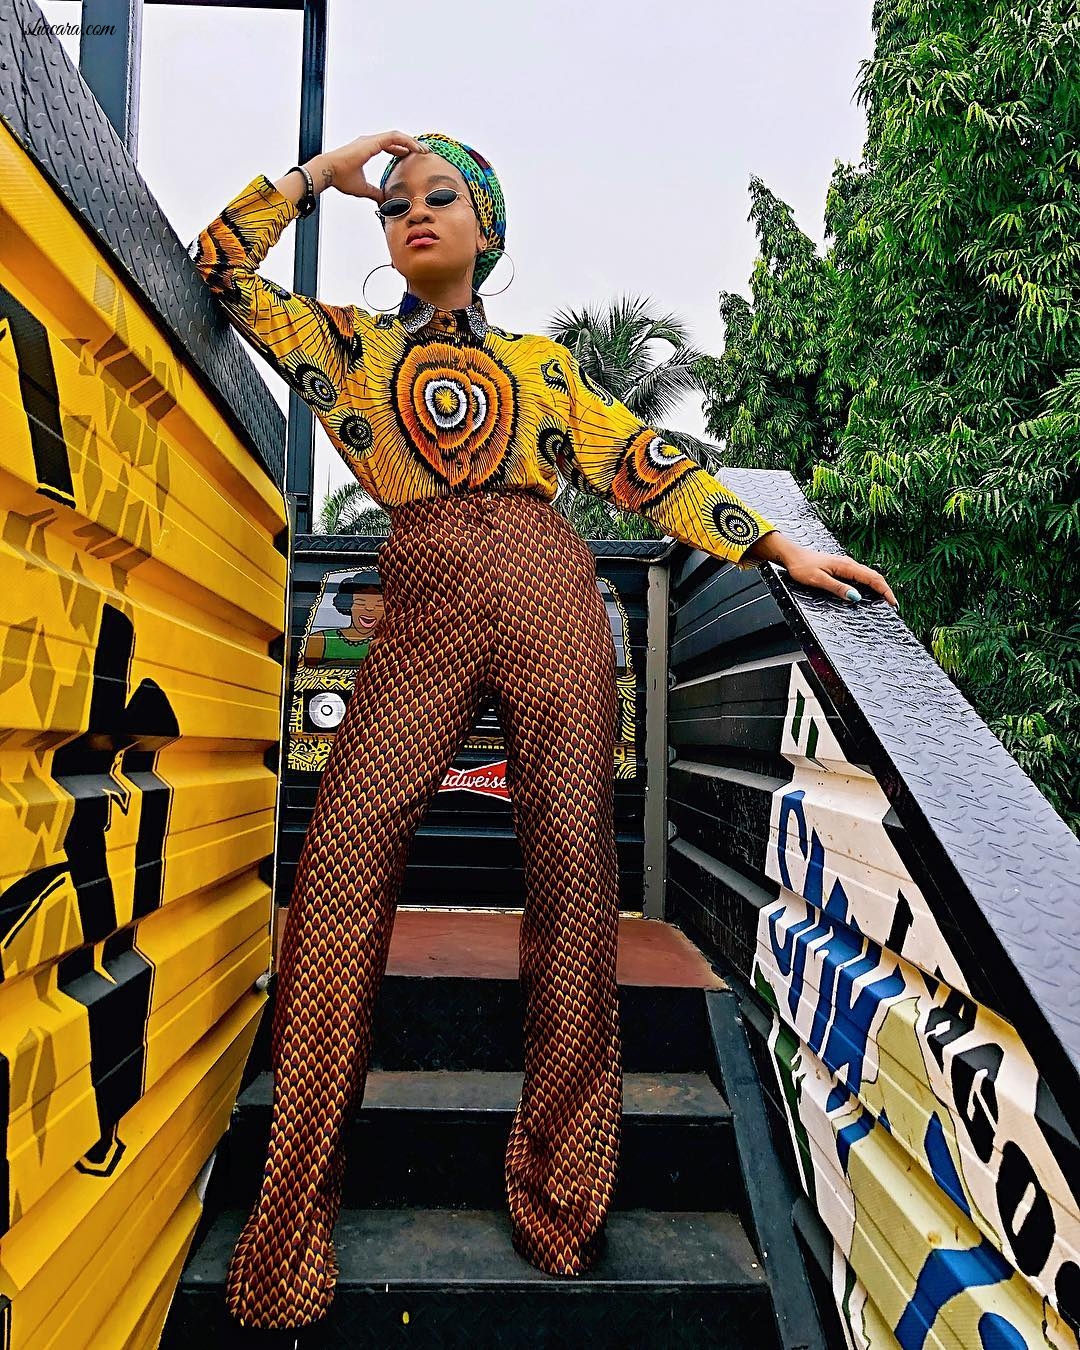 A Lesson In How To Clash Prints — According To Jennifer Oseh